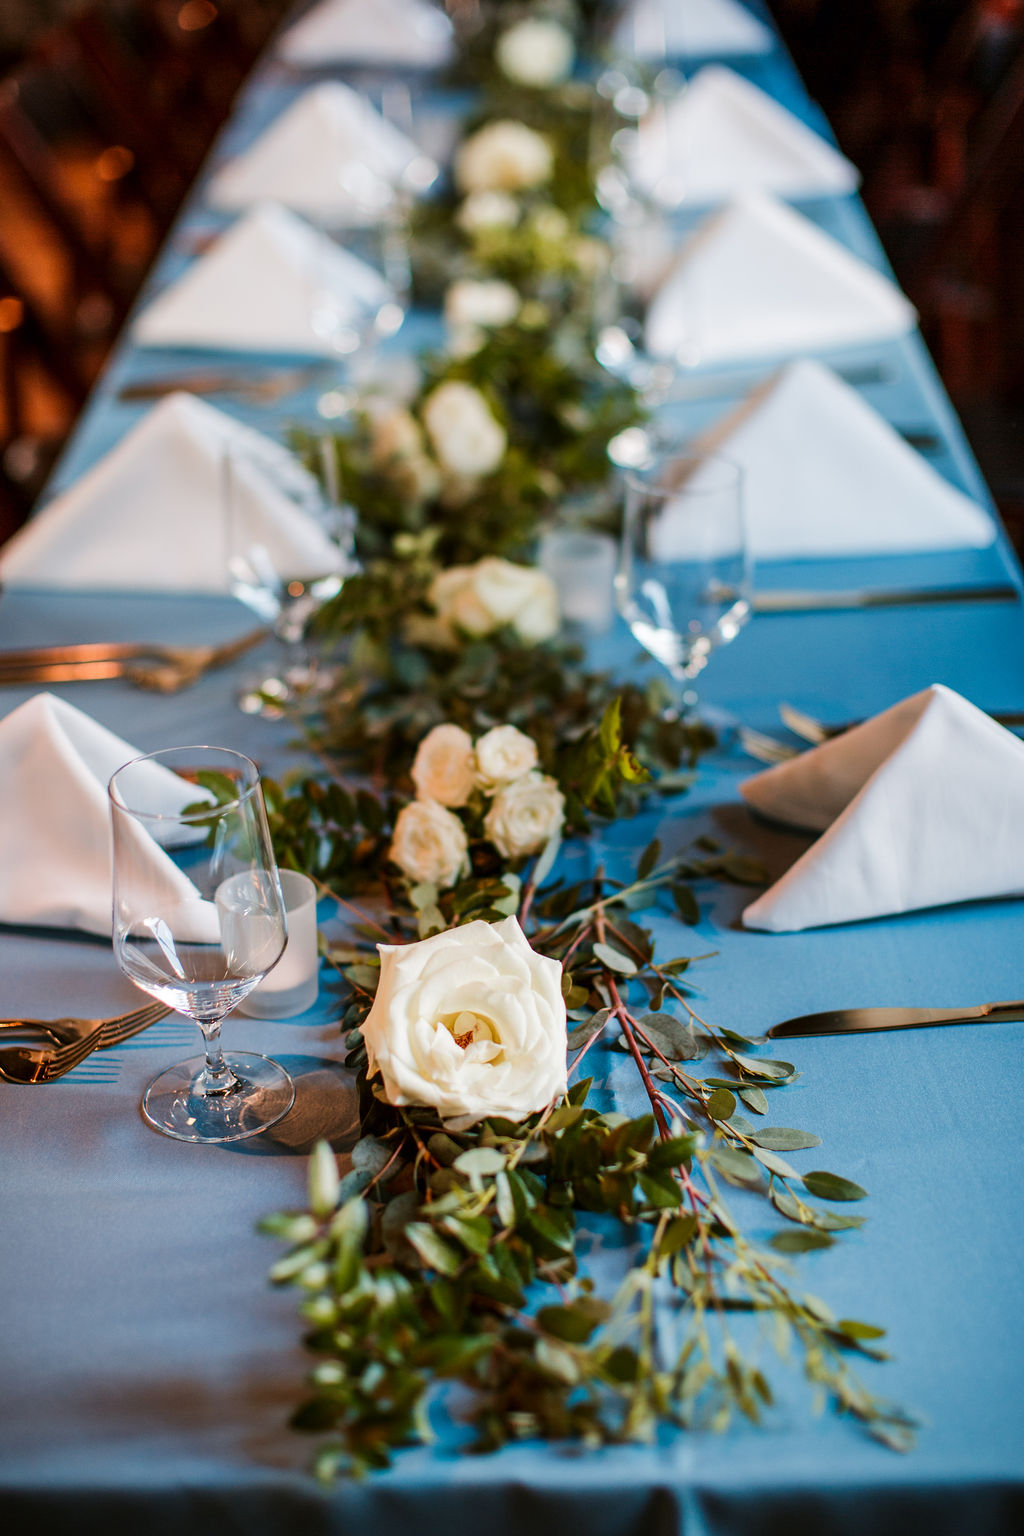 Eucalyptus garland table runners with floral accents of white and blush // TN Floral Designer